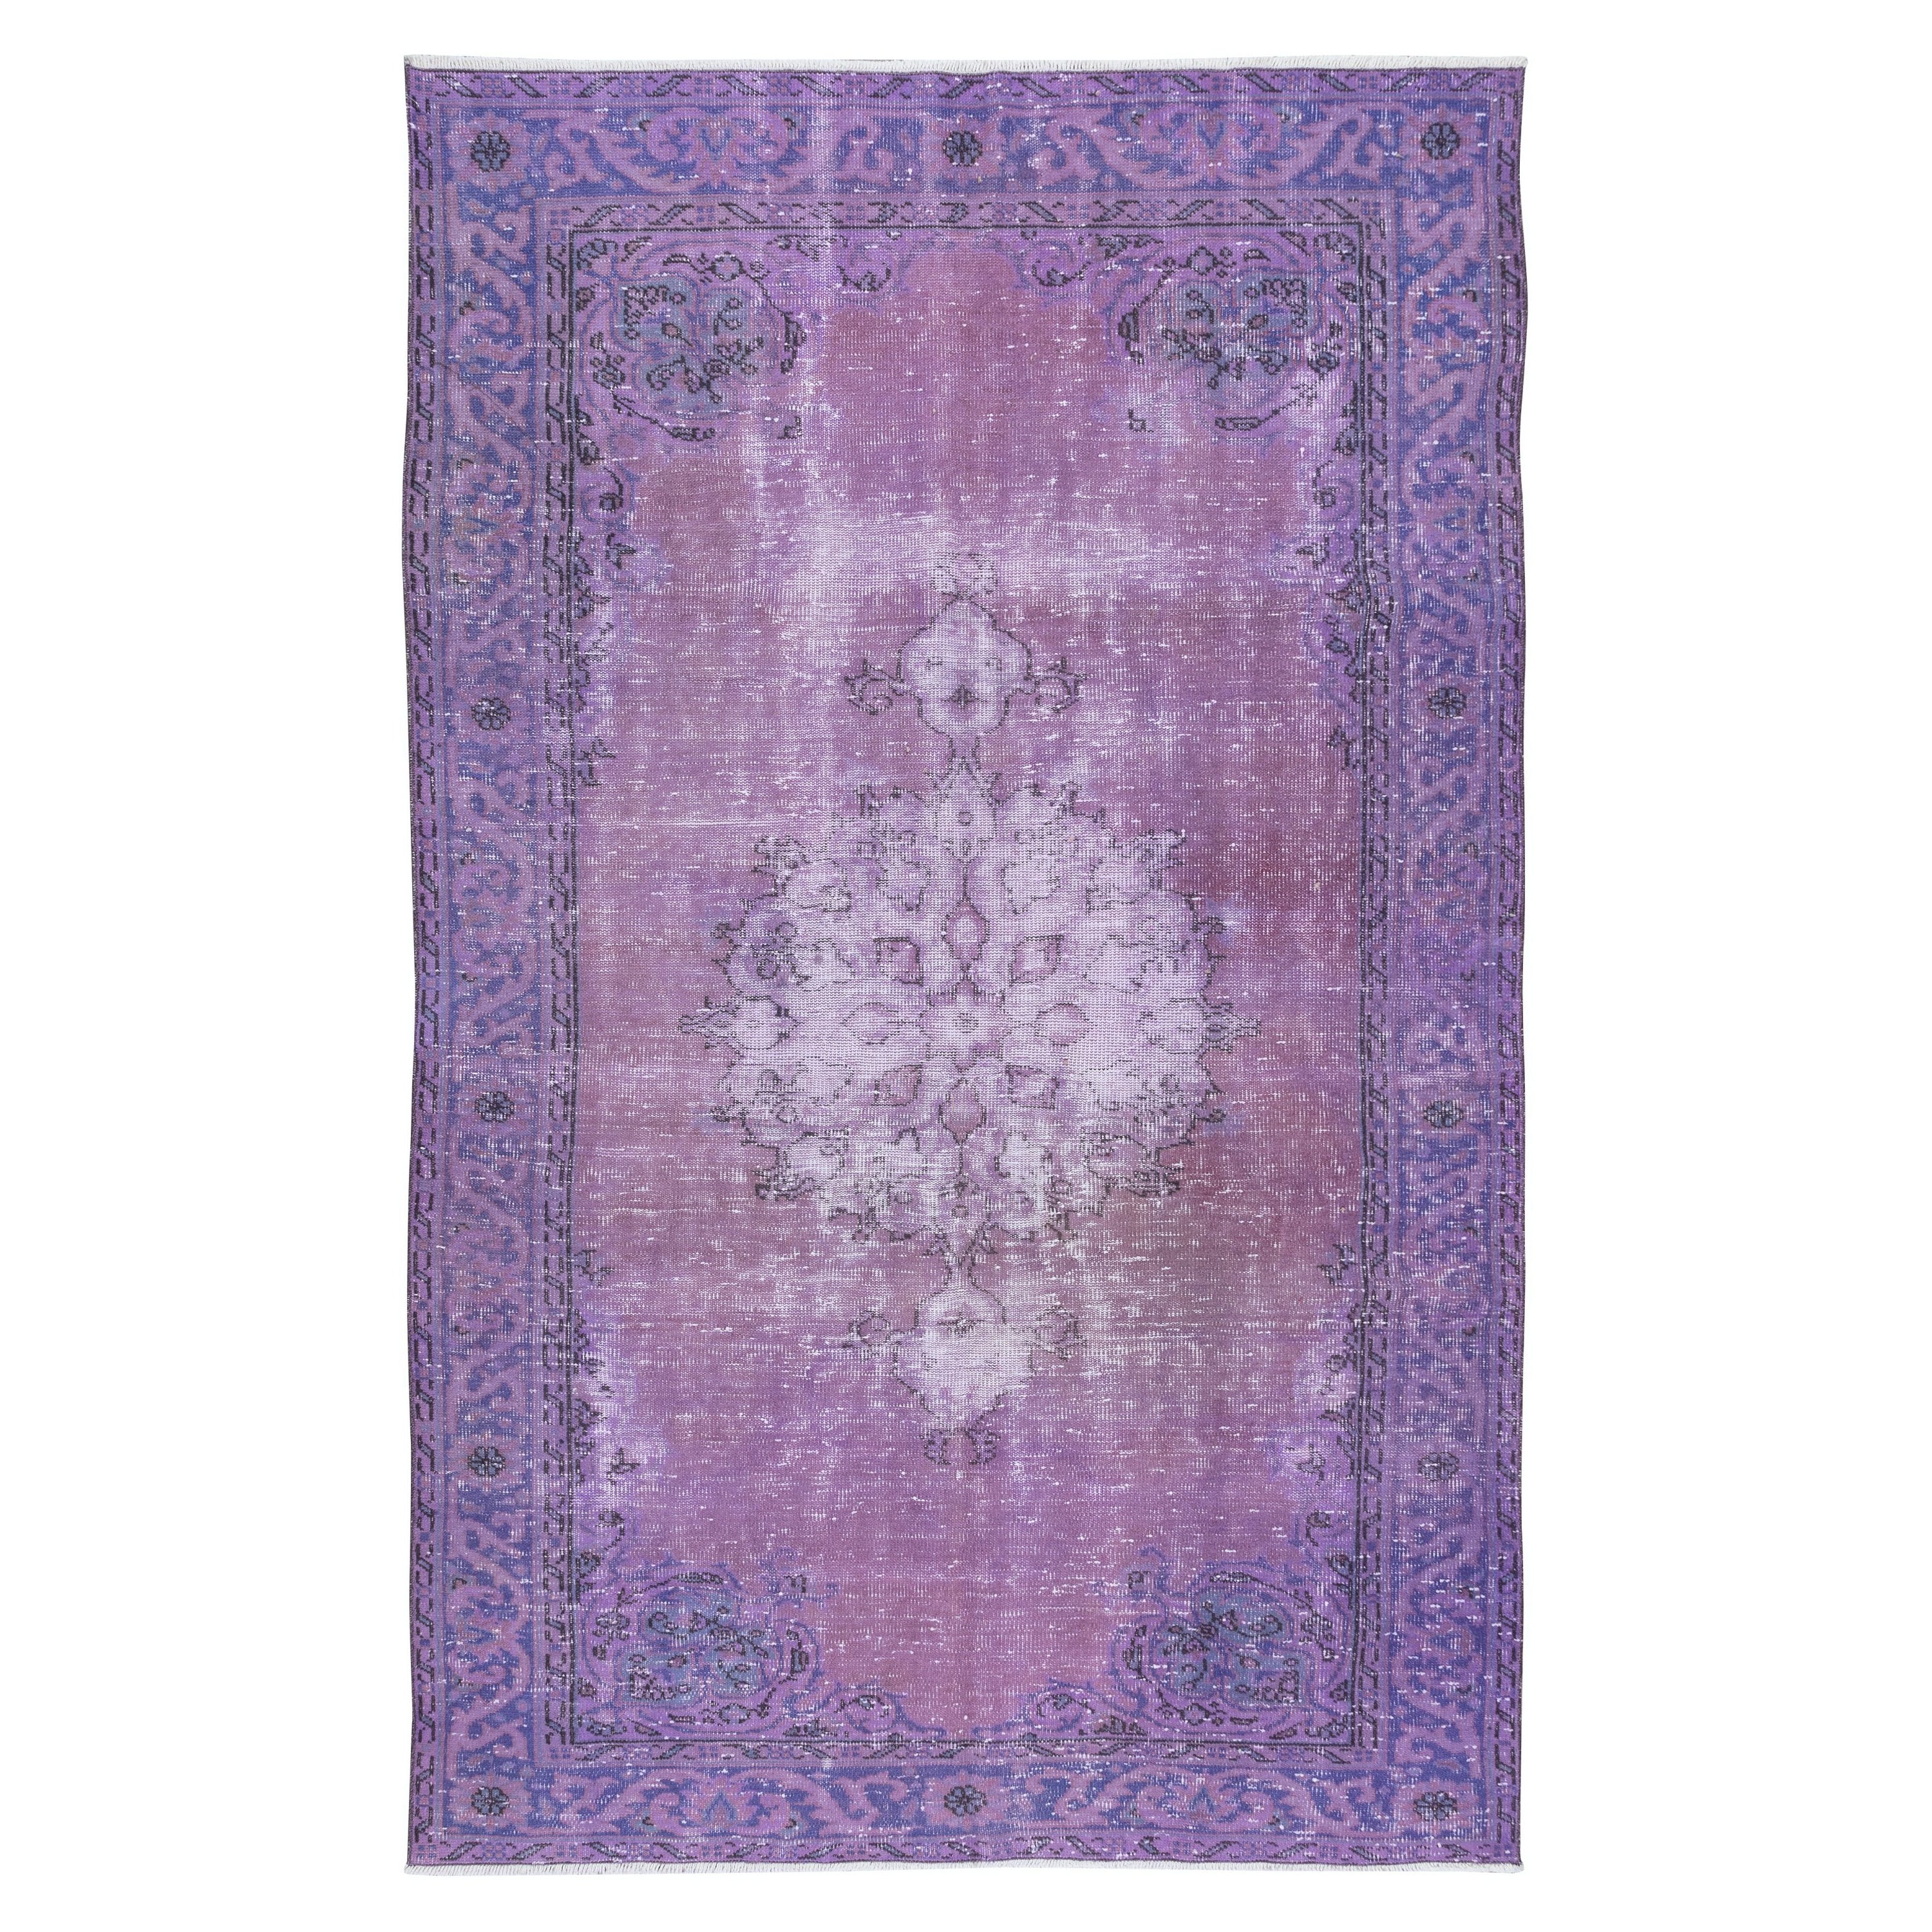 5.8x9 Ft Hand Knotted Turkish Wool Area Rug, Lavender & Orchid Purple Colors For Sale